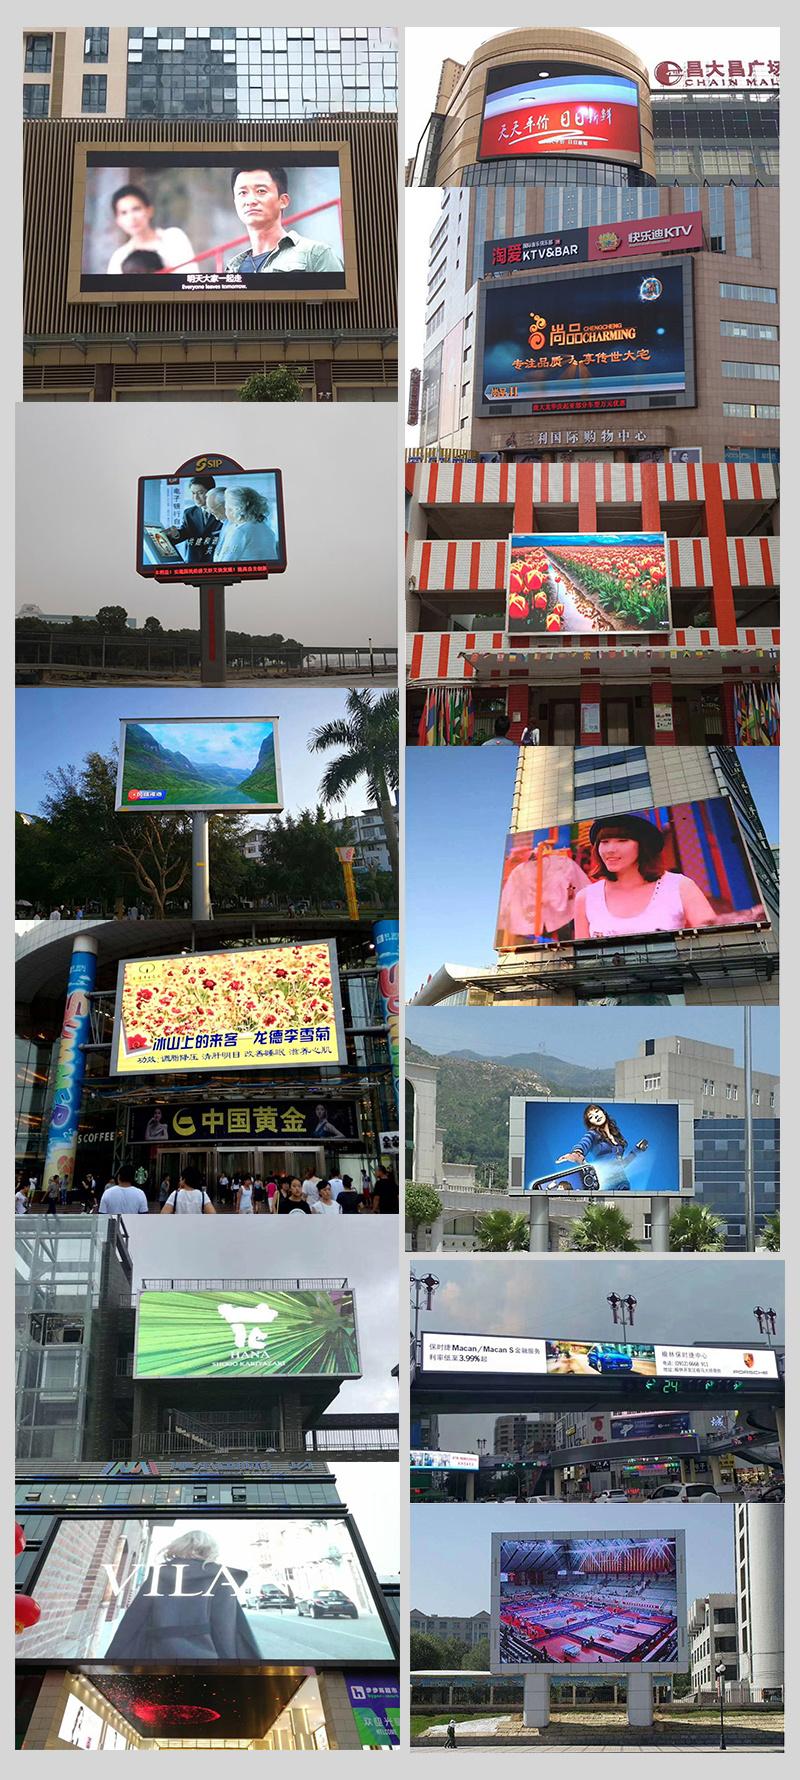 High Quality LED Display Outdoor Advertising Rental Curved Digital Screen for P1.8 P2.5 P3.91 P4.44 P4.81 P5.33 P6.67 P8 P10 Advertising Screen Display